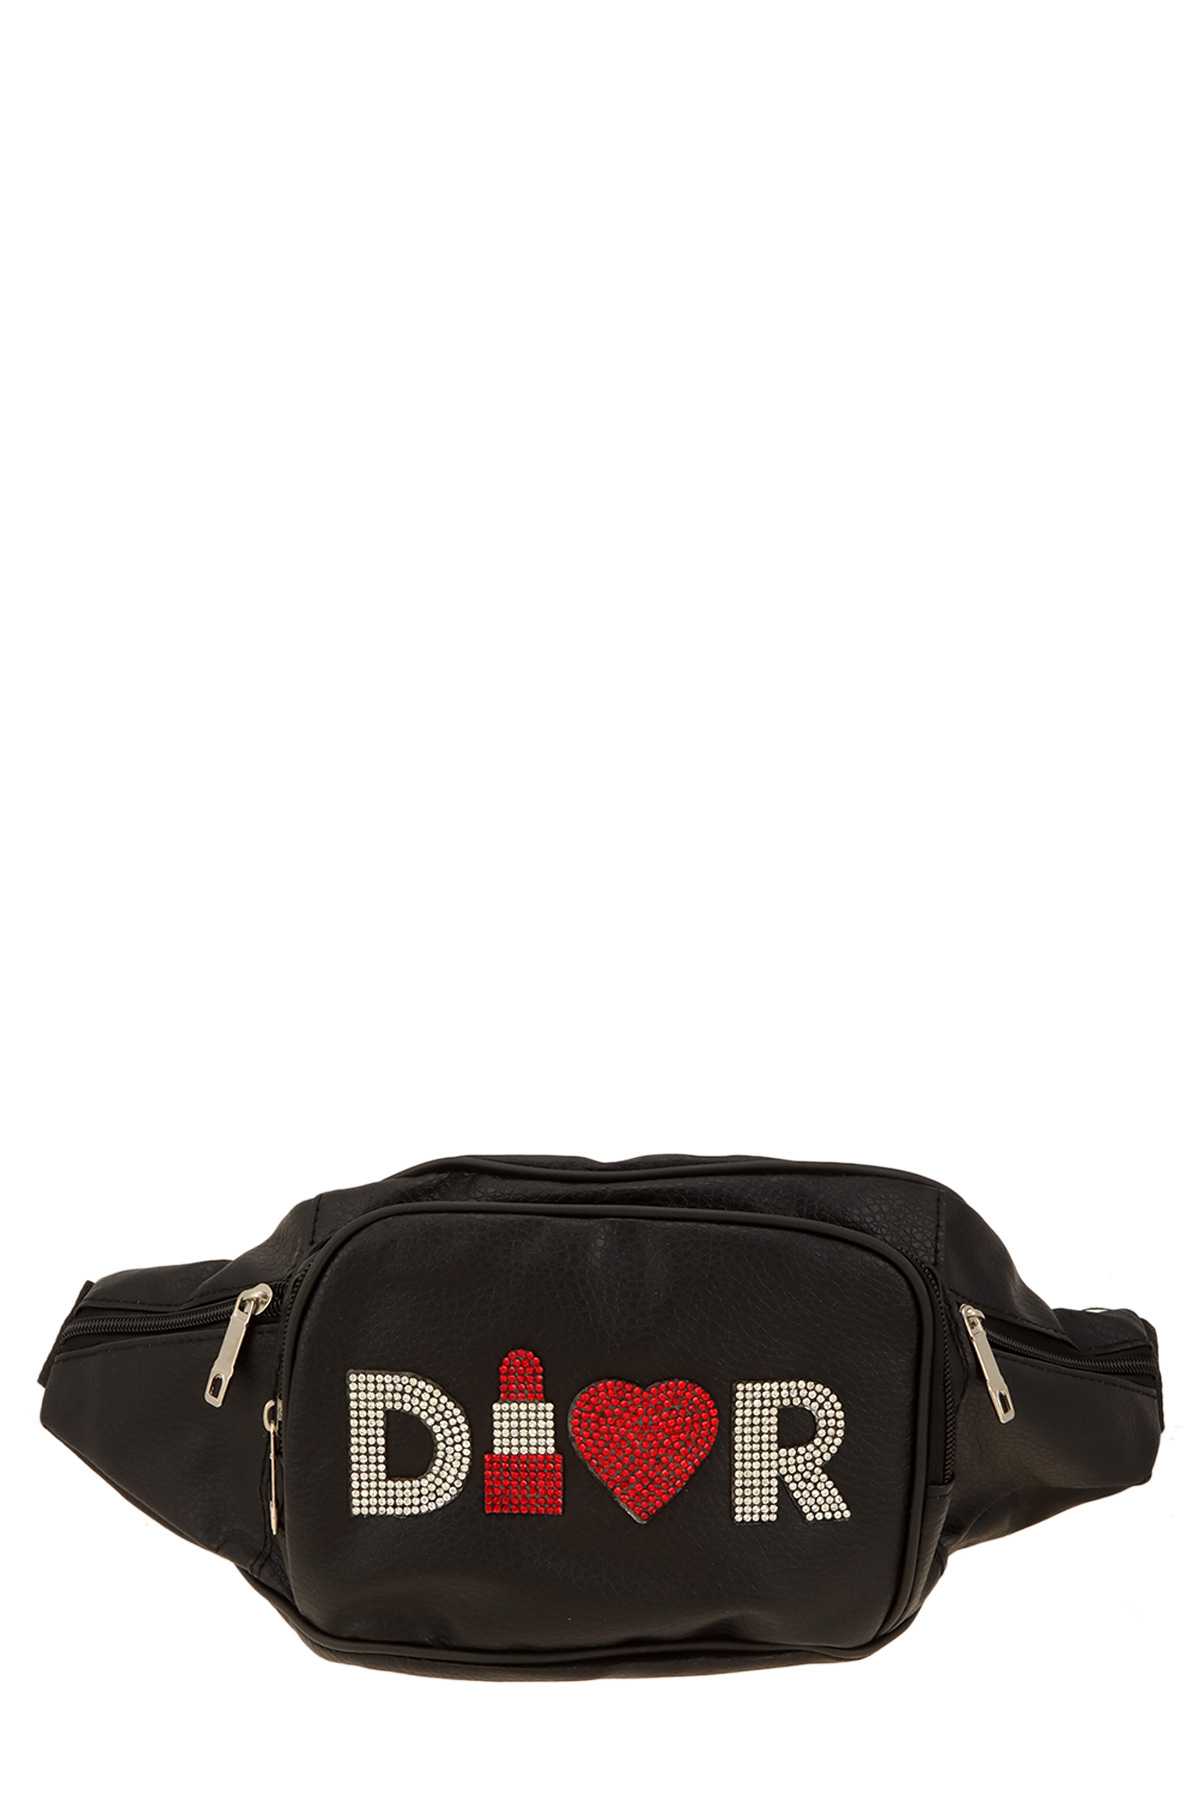 D and R Rhinestone Fanny Pack